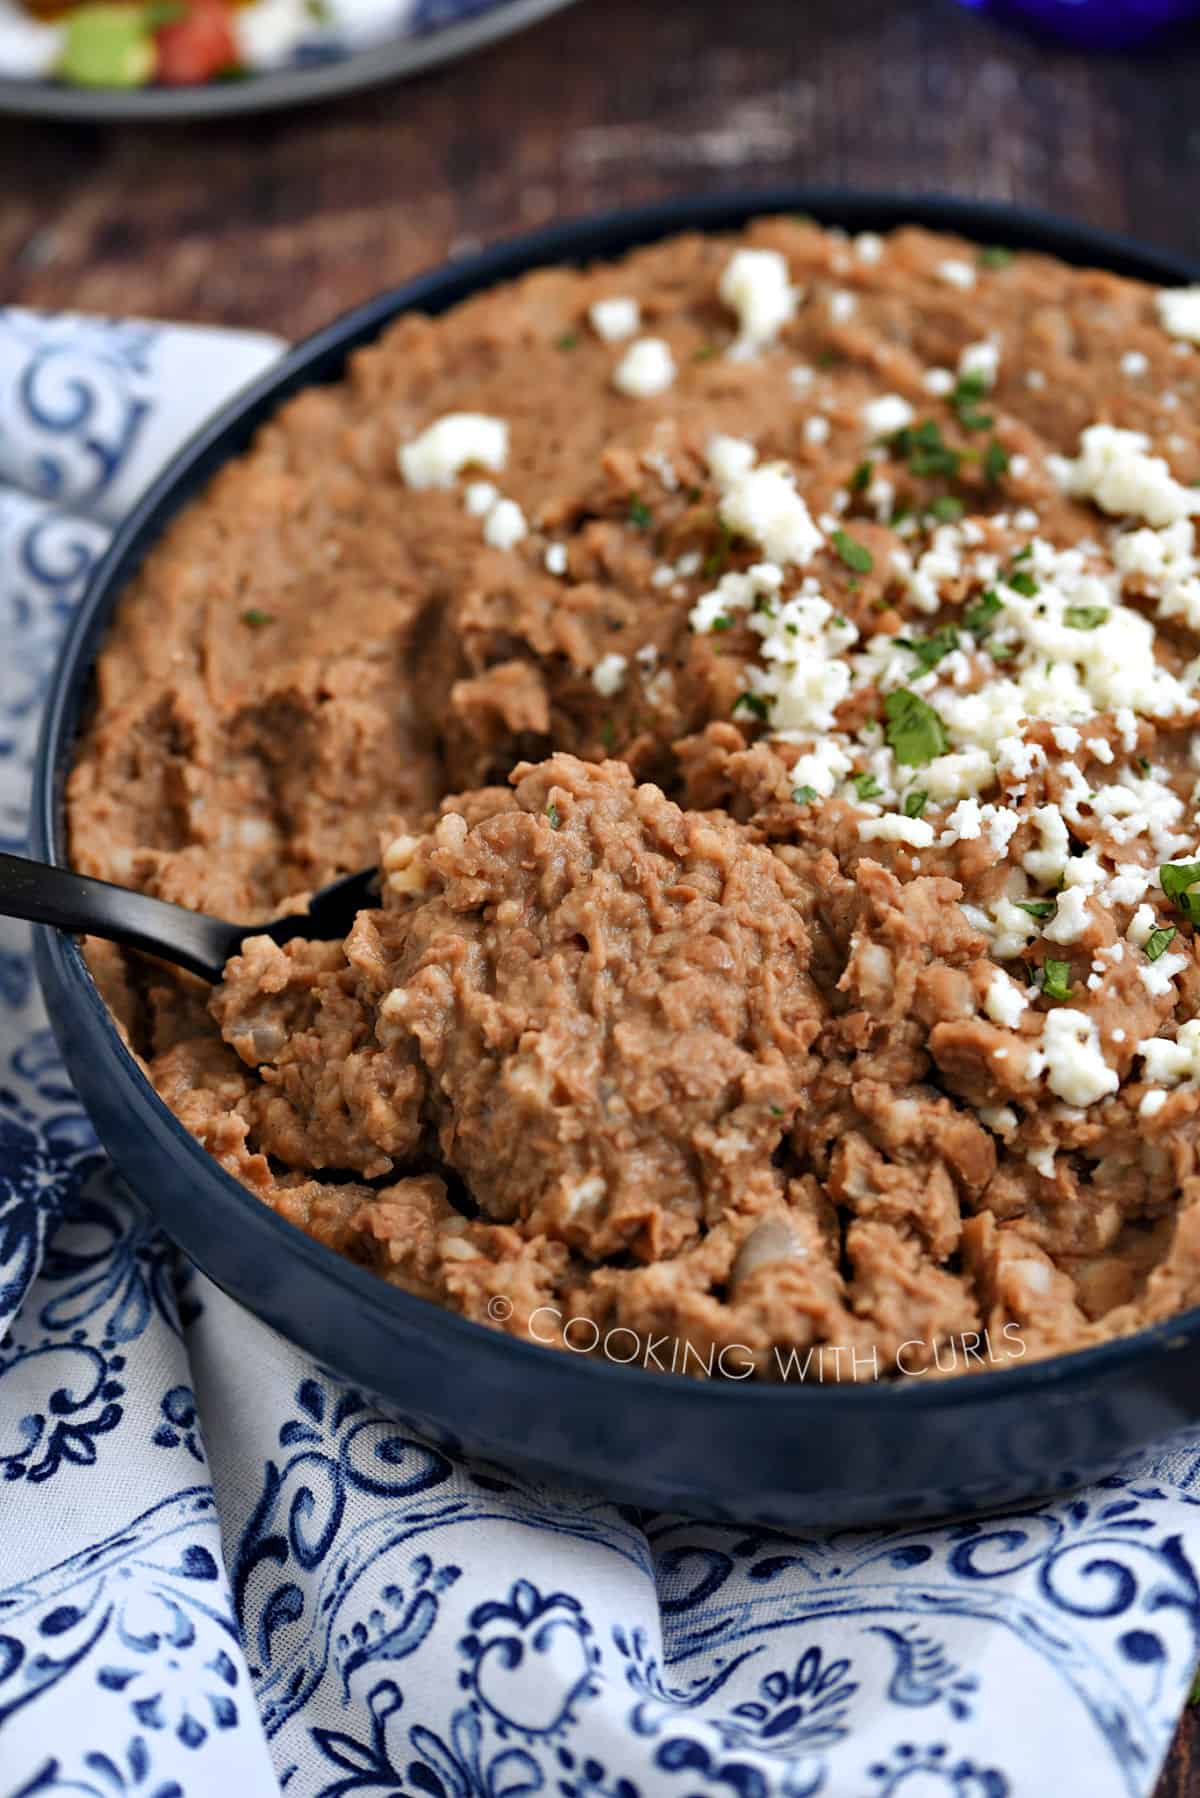 Creamy, mashed Instant Pot refried beans in a blue bowl topped with crumbled cheese and chopped cilantro being scooped with a large black spoon.